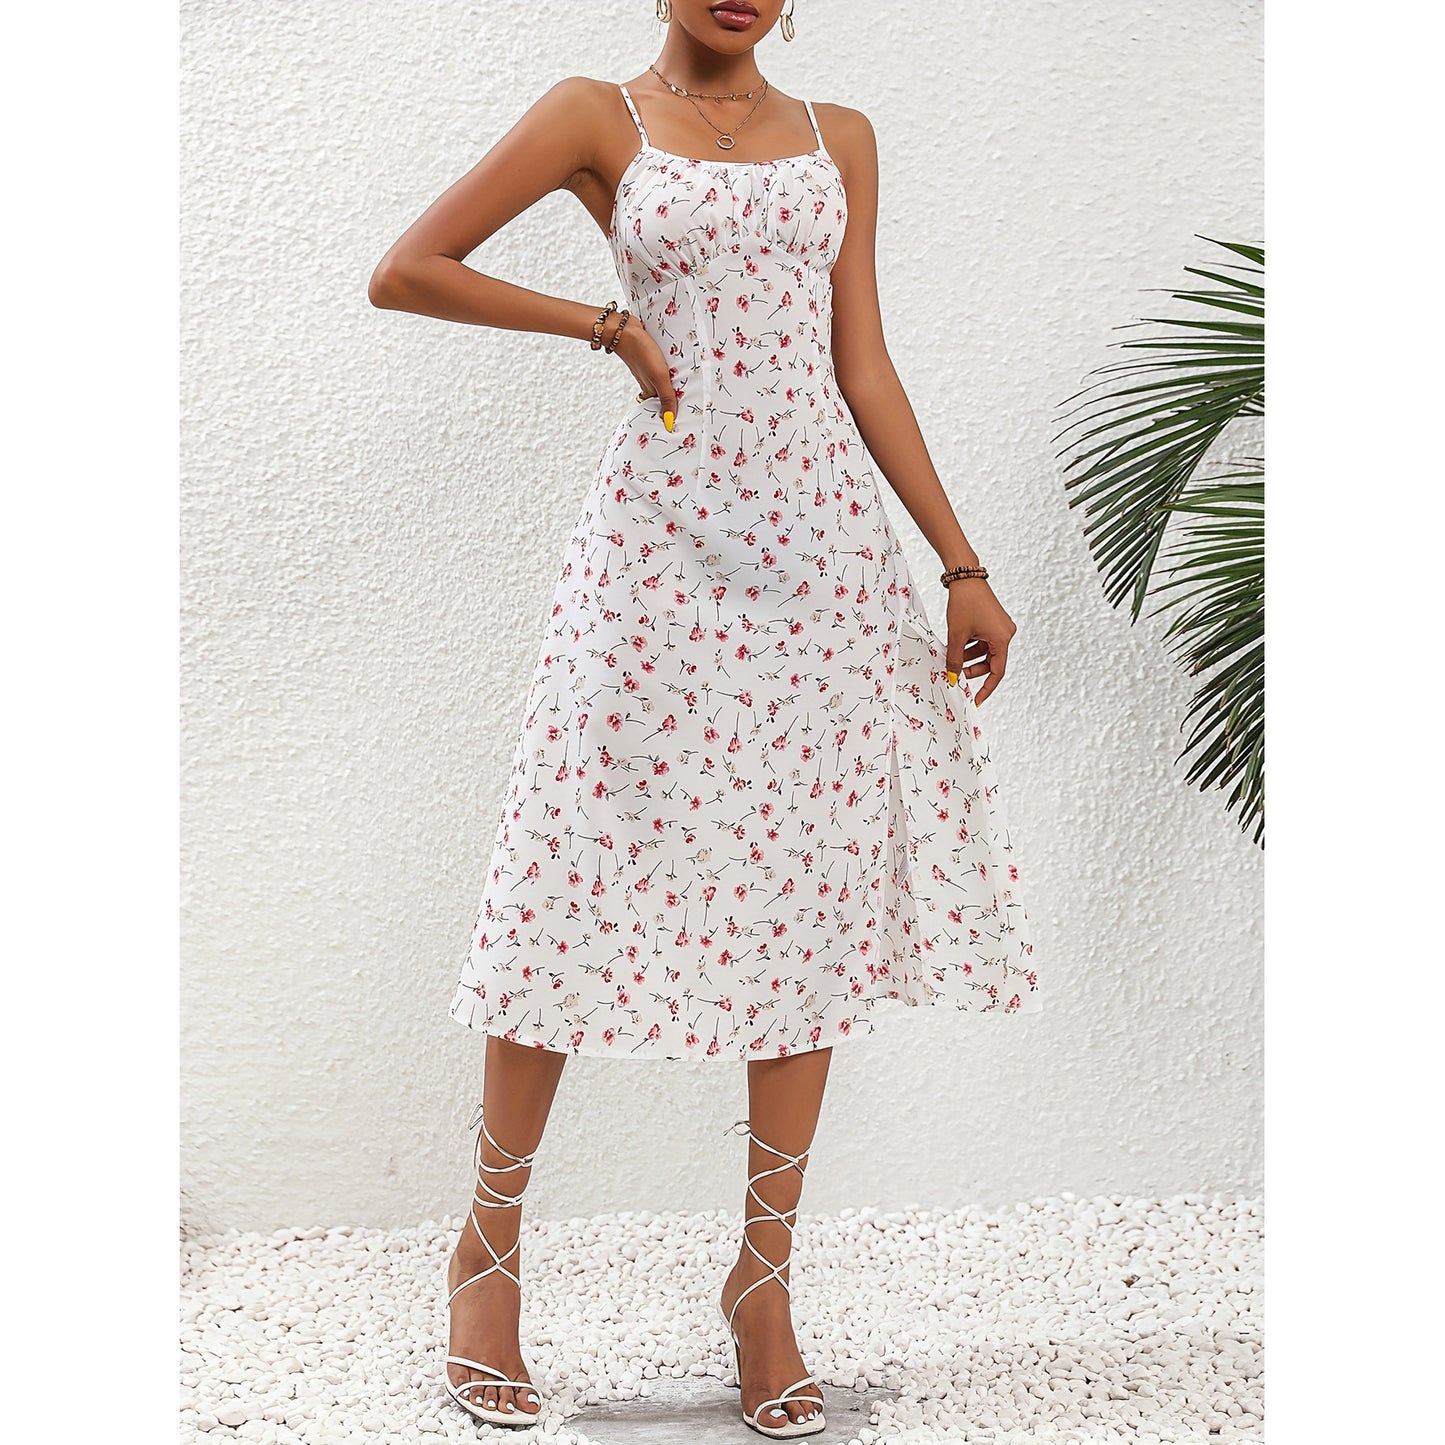 Polka dot print suspender dress with slit in various colors from Eternal Gleams